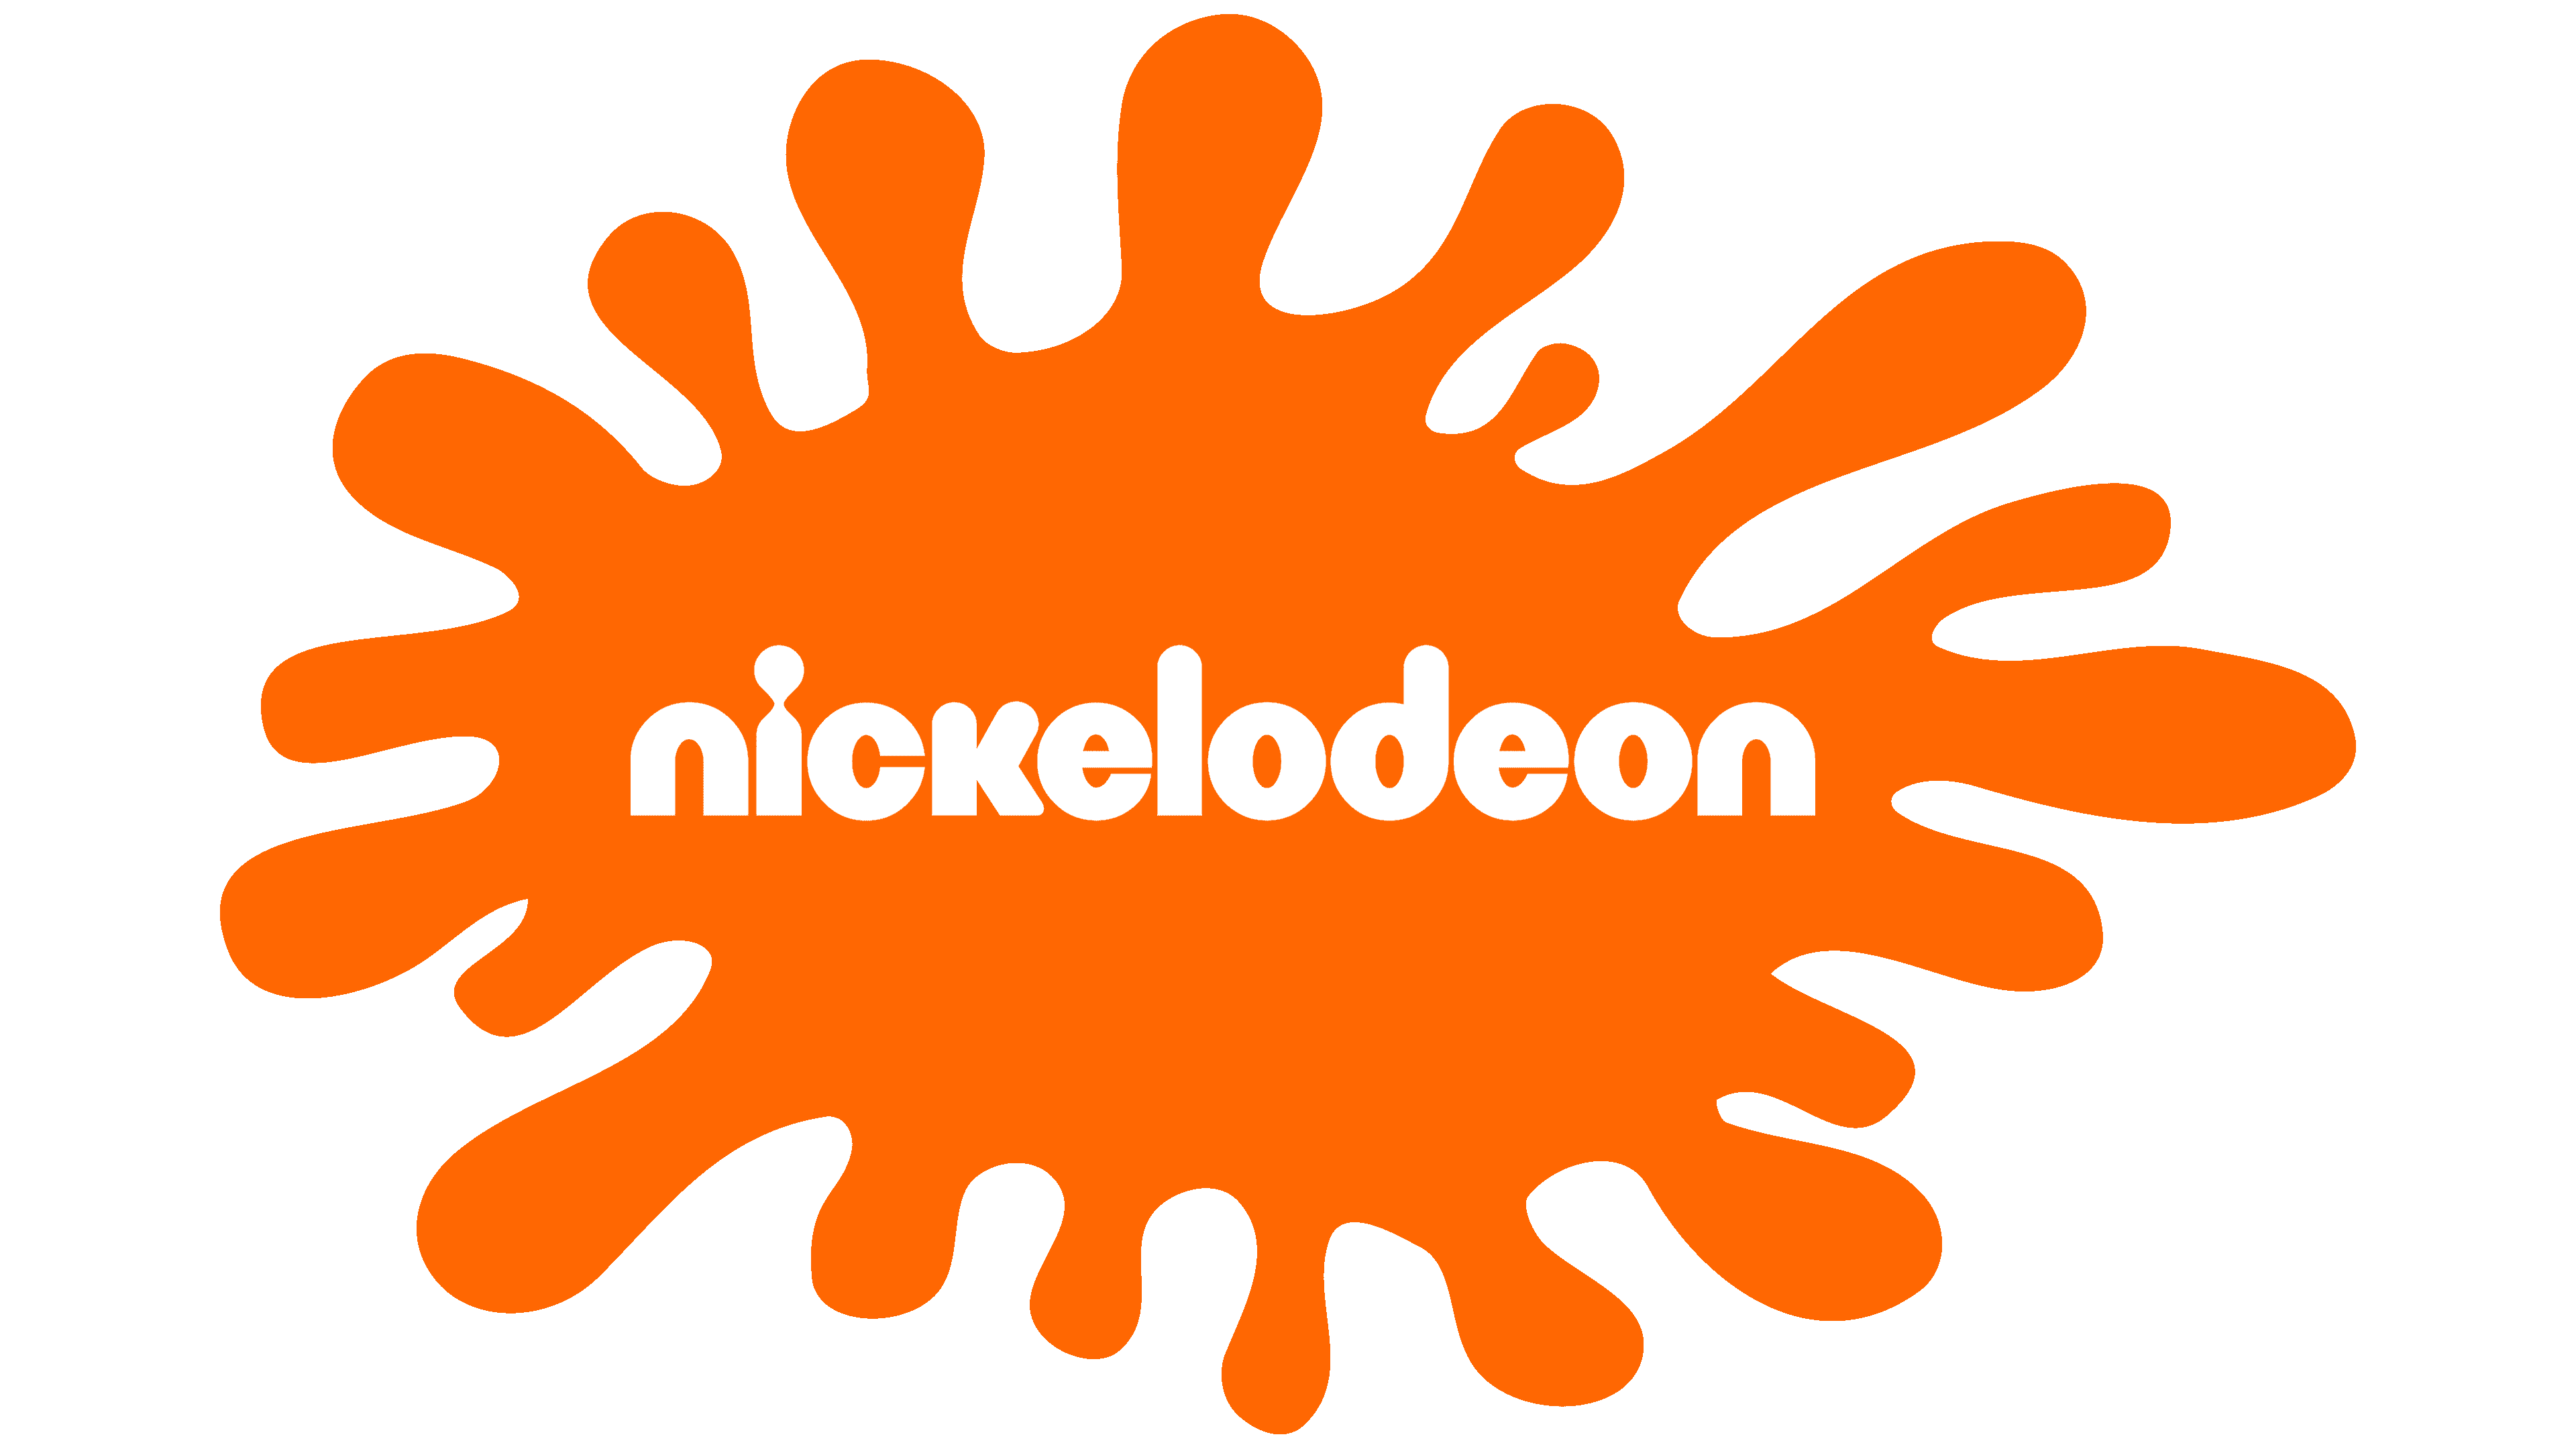 Who Owns Nickelodeon: The Real Owner Of Nickelodeon, Is Nick Cannon?